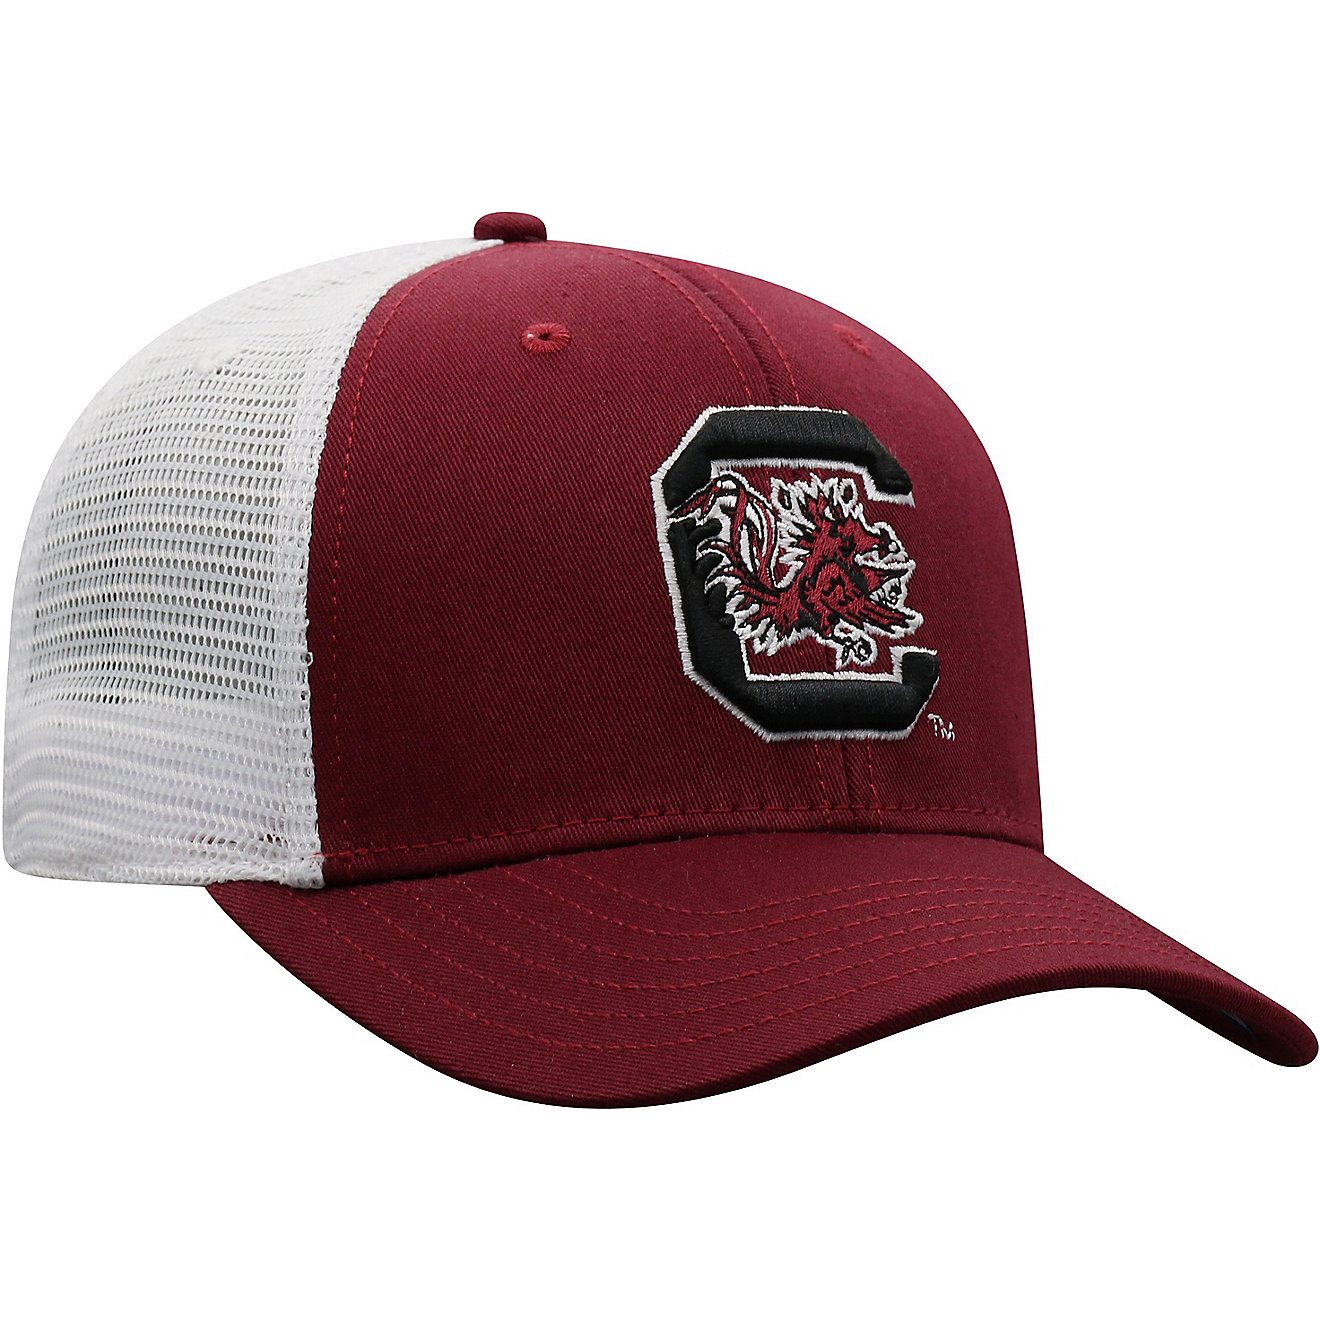 Top of the World Men's University of South Carolina BB 2-Tone Ball Cap                                                           - view number 3